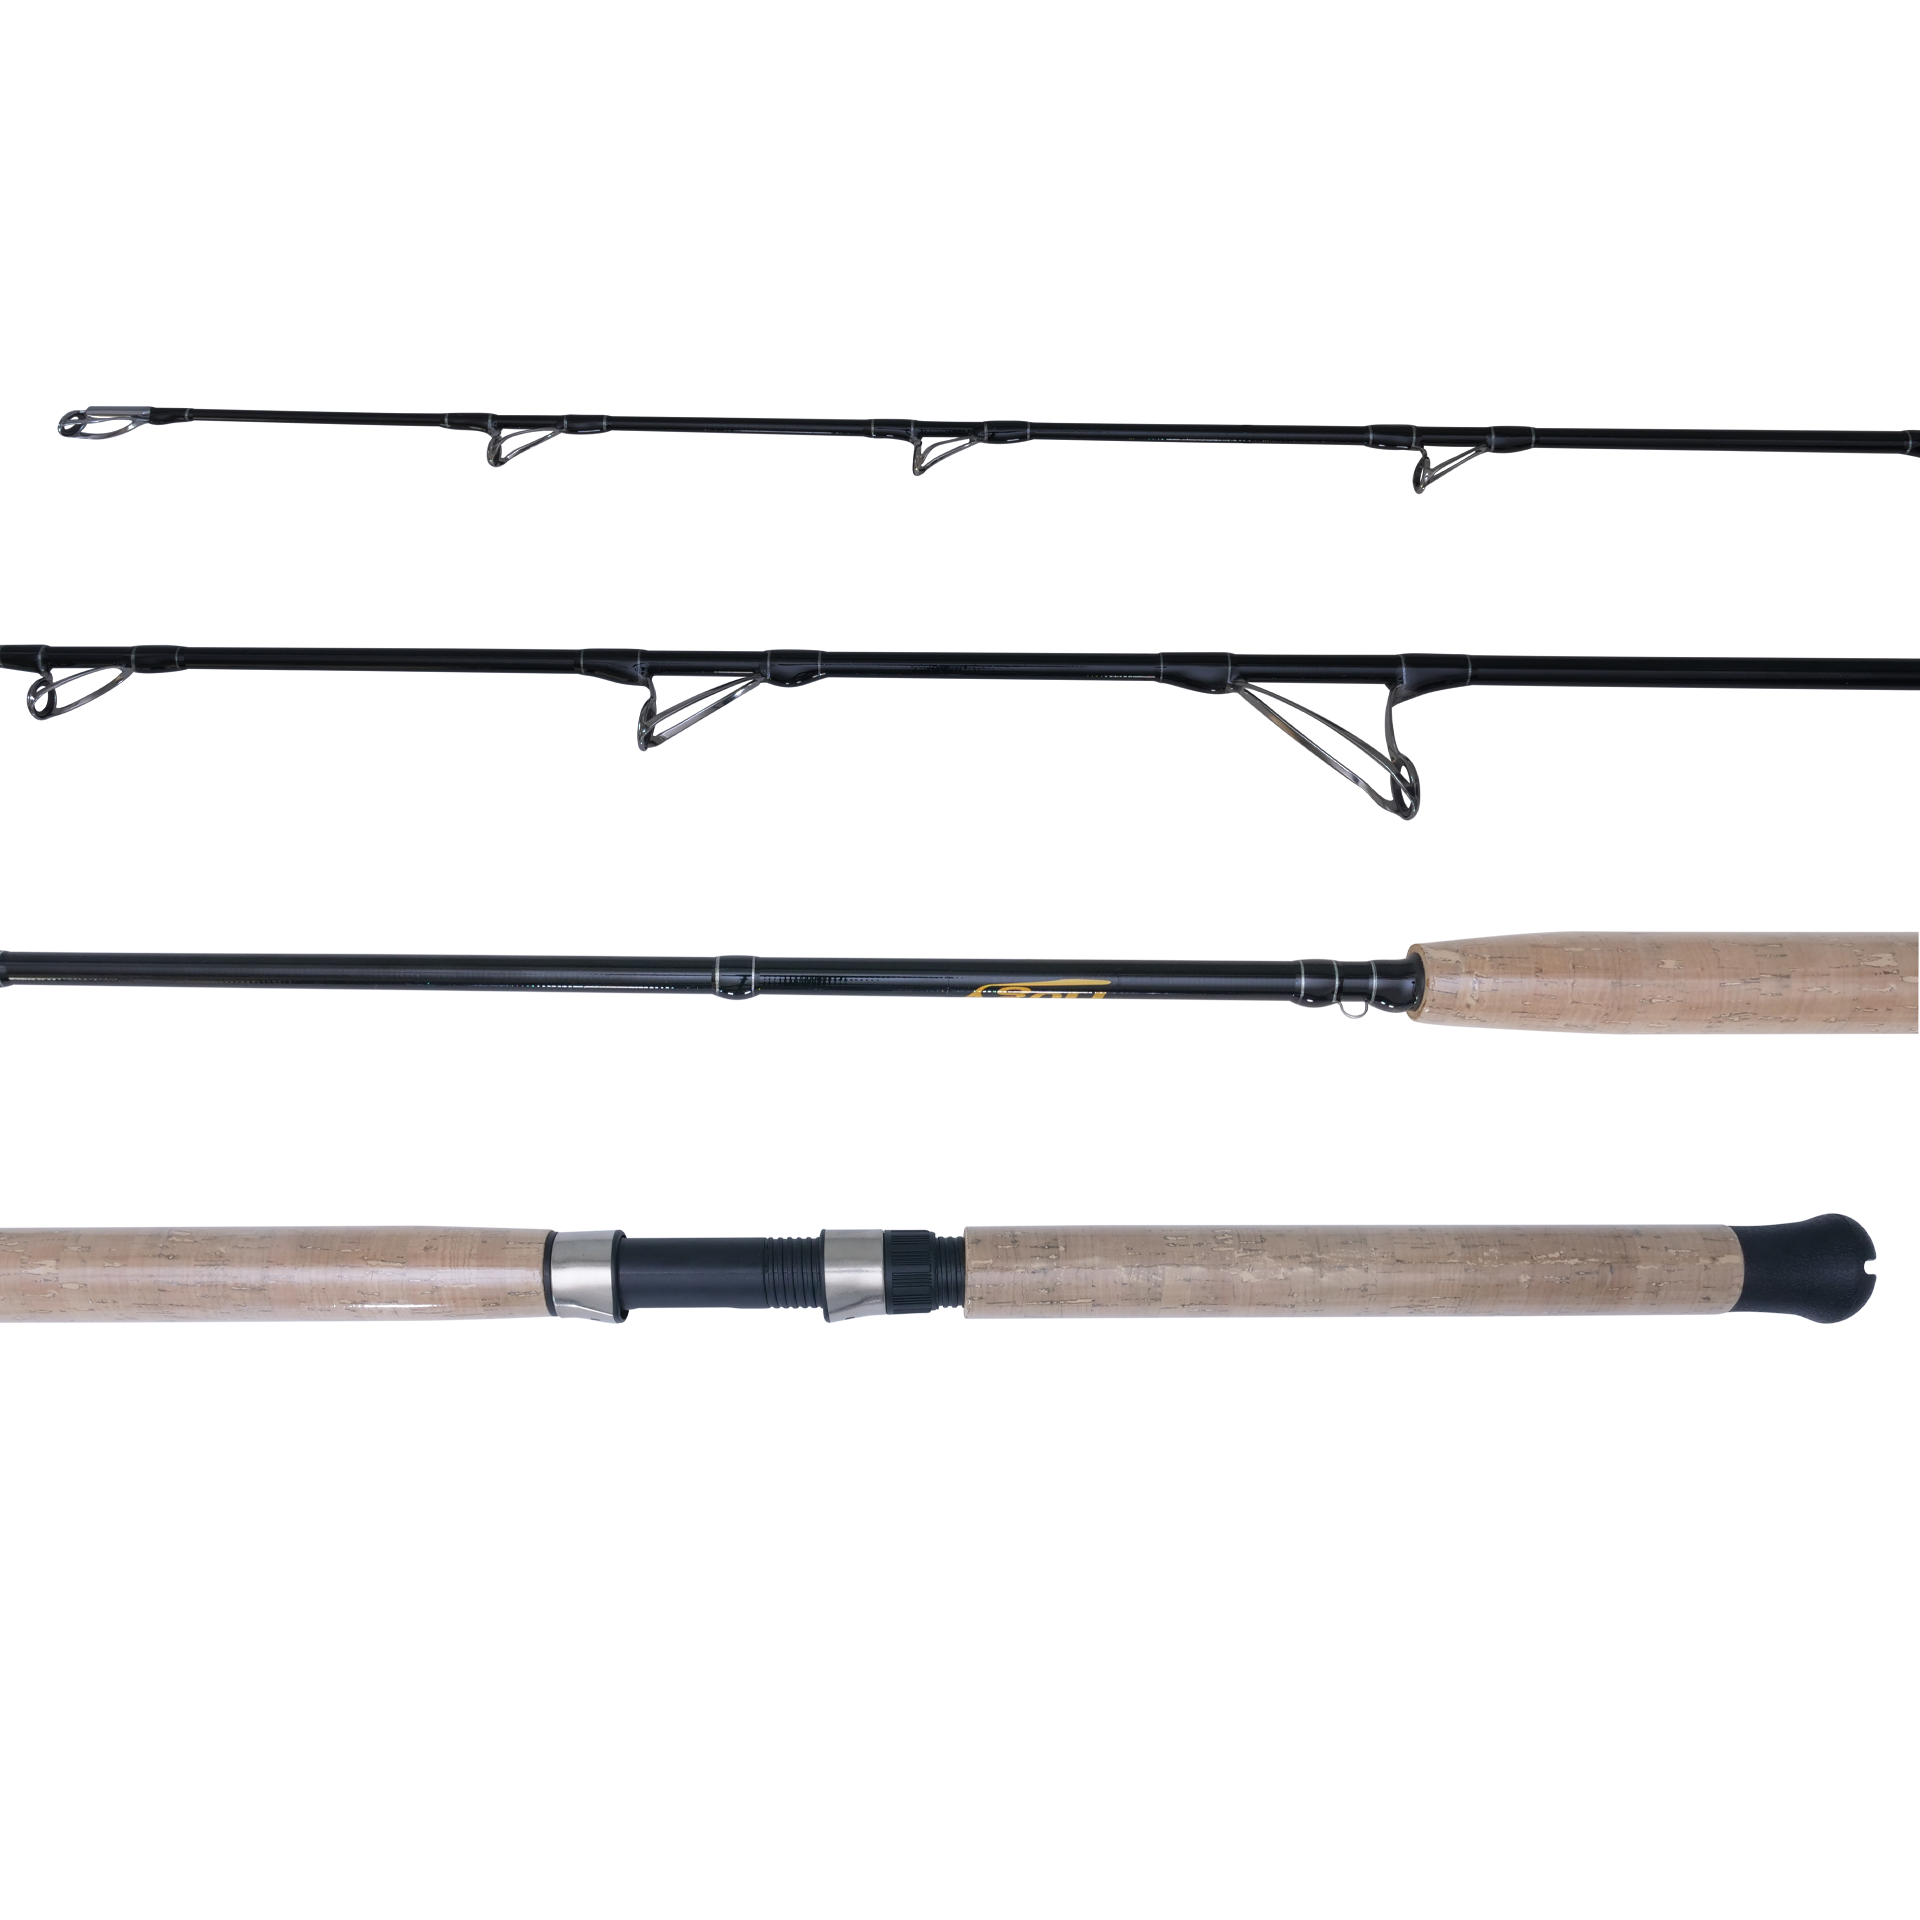 Pre-Order: Tuna Casting Spinning Rod: Mod-Fast Action 7' H (3oz